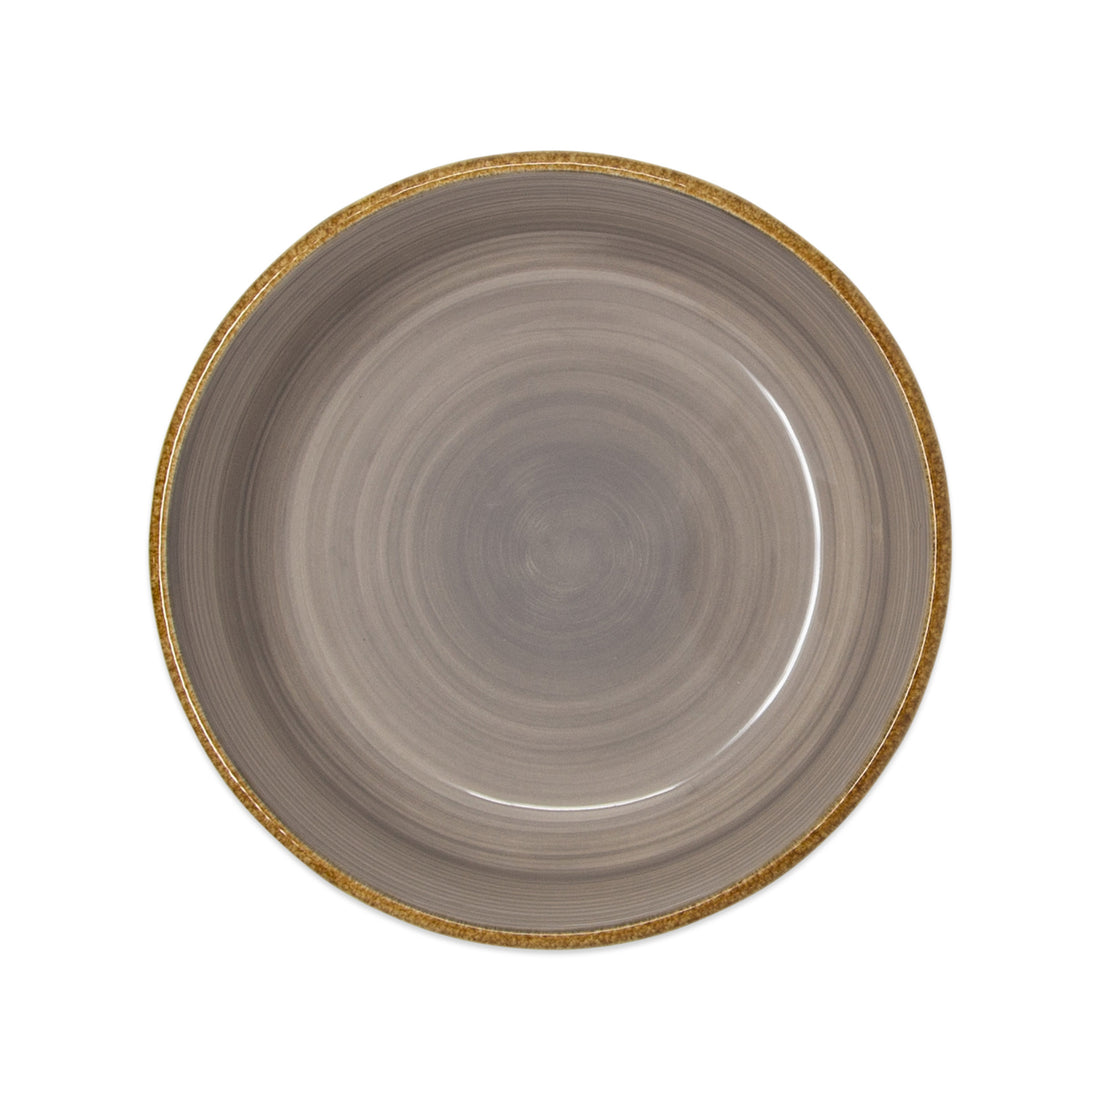 Inner Earth Bamboo Patter Cereal Bowl